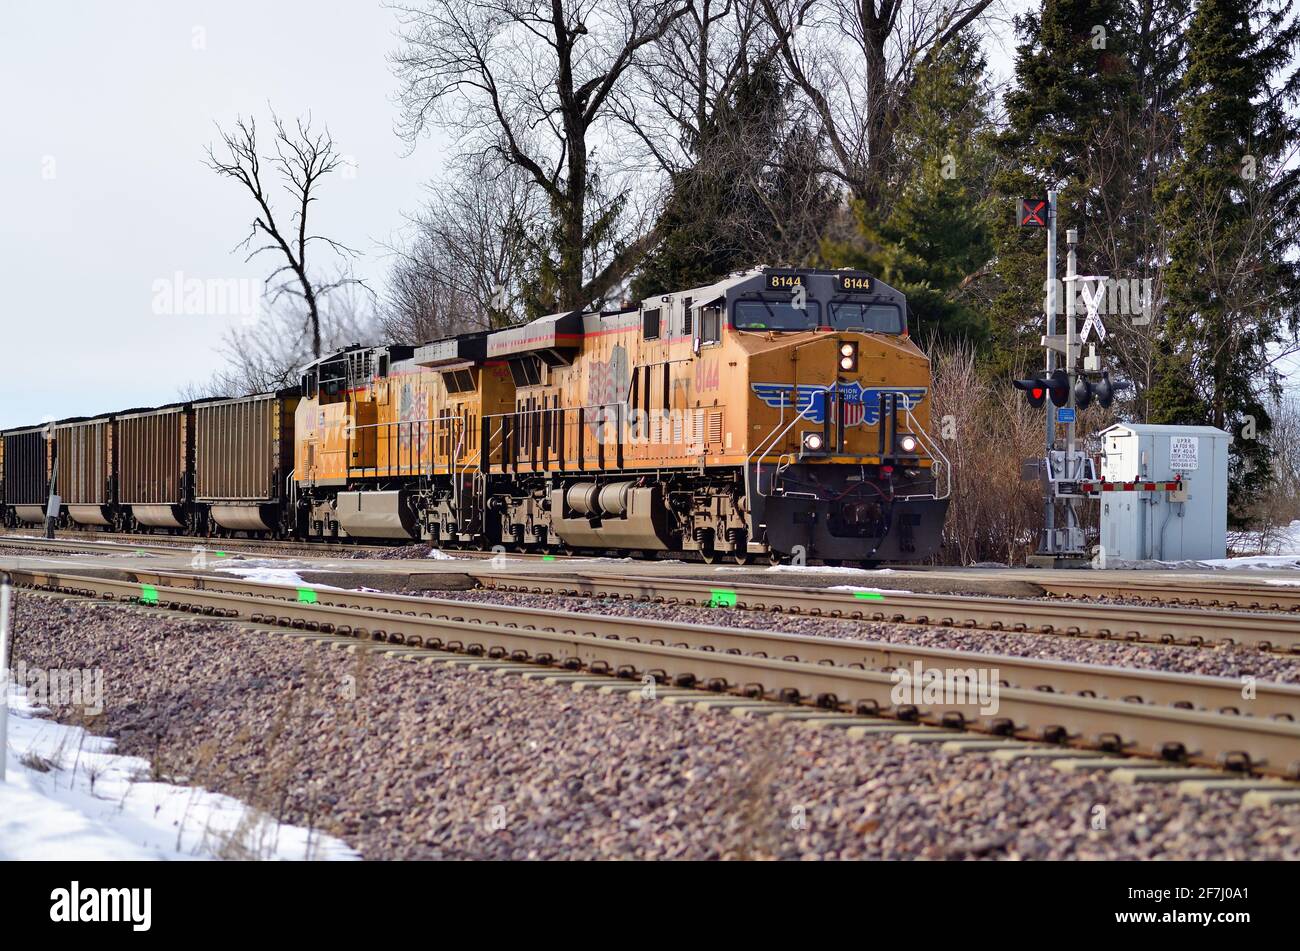 La Fox, Illinois, USA. Union Pacific Railroad locomotives lead an eastbound unit train through a rural road crossing on its journey to Chicago. Stock Photo